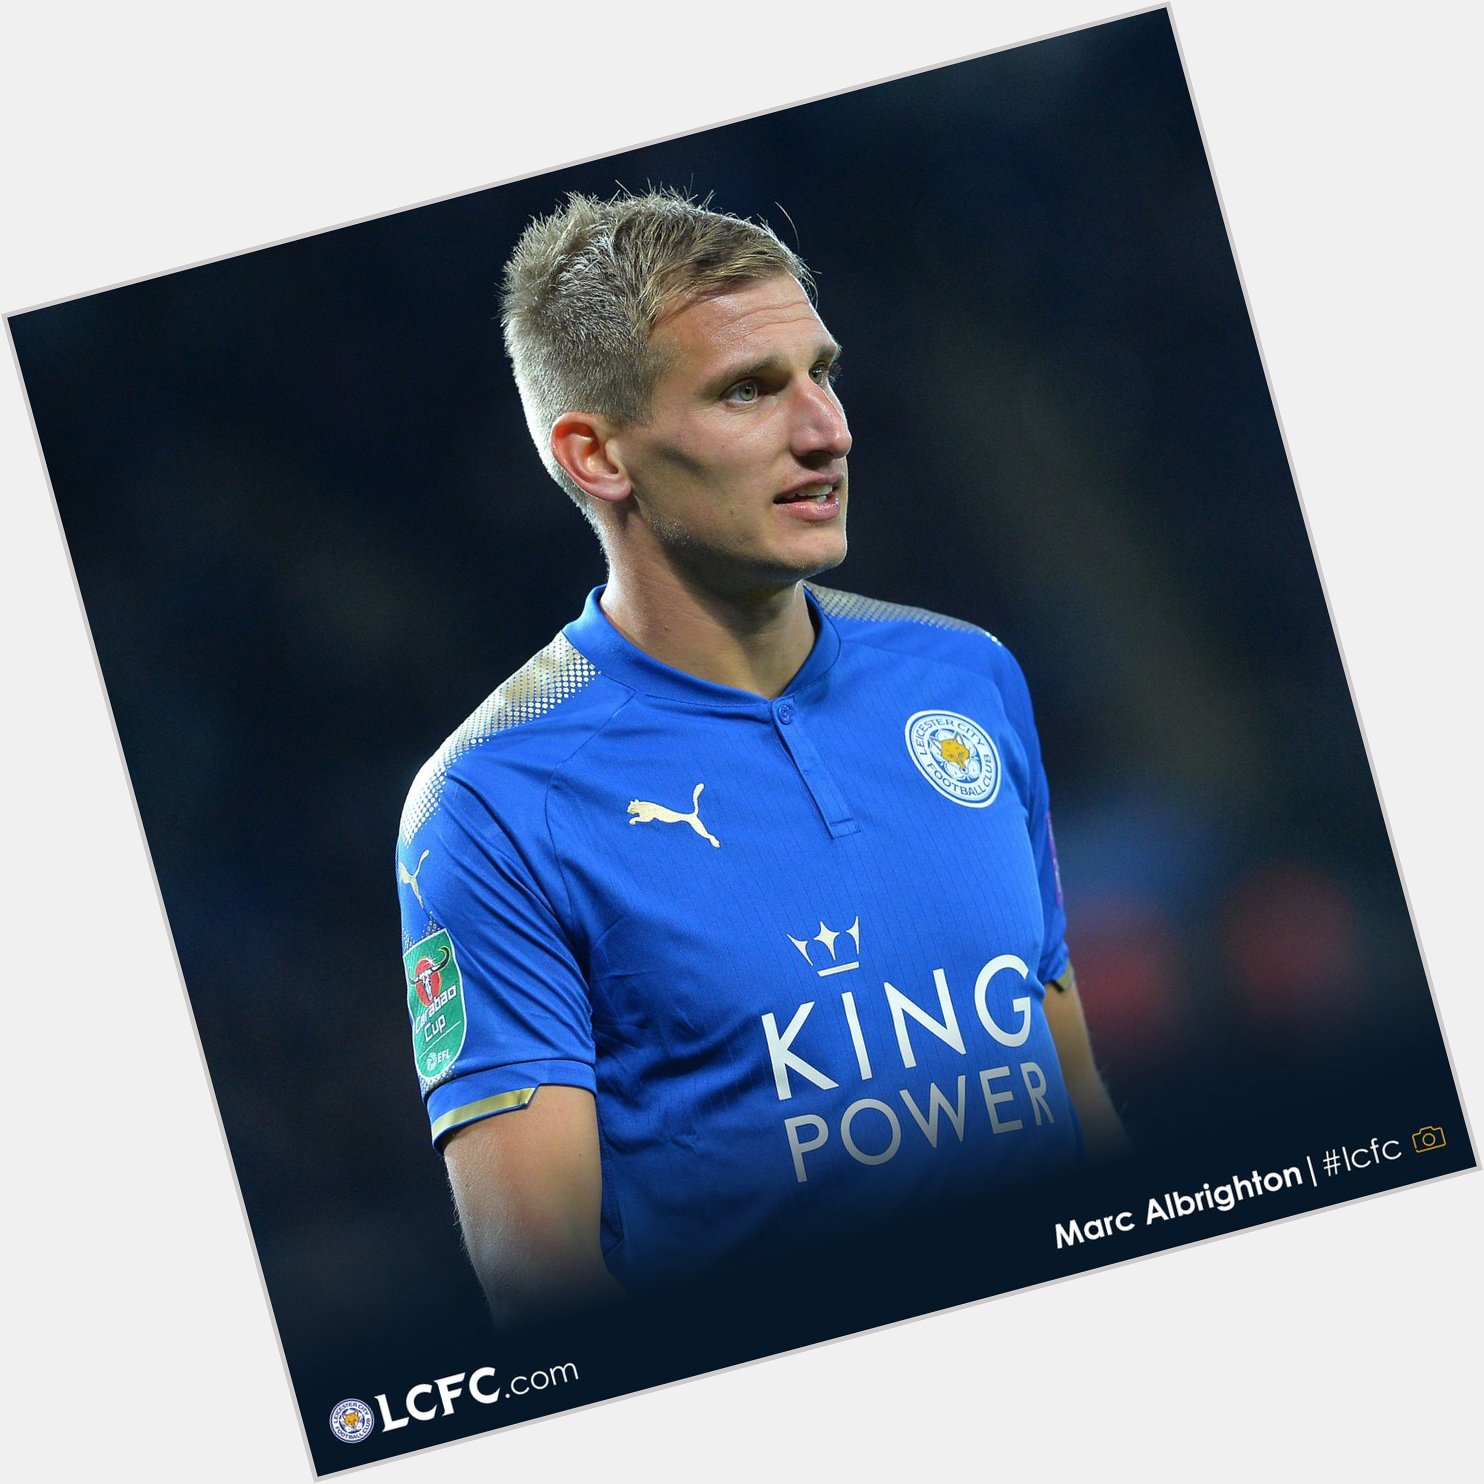 Join us in wishing Marc Albrighton a very happy birthday!  